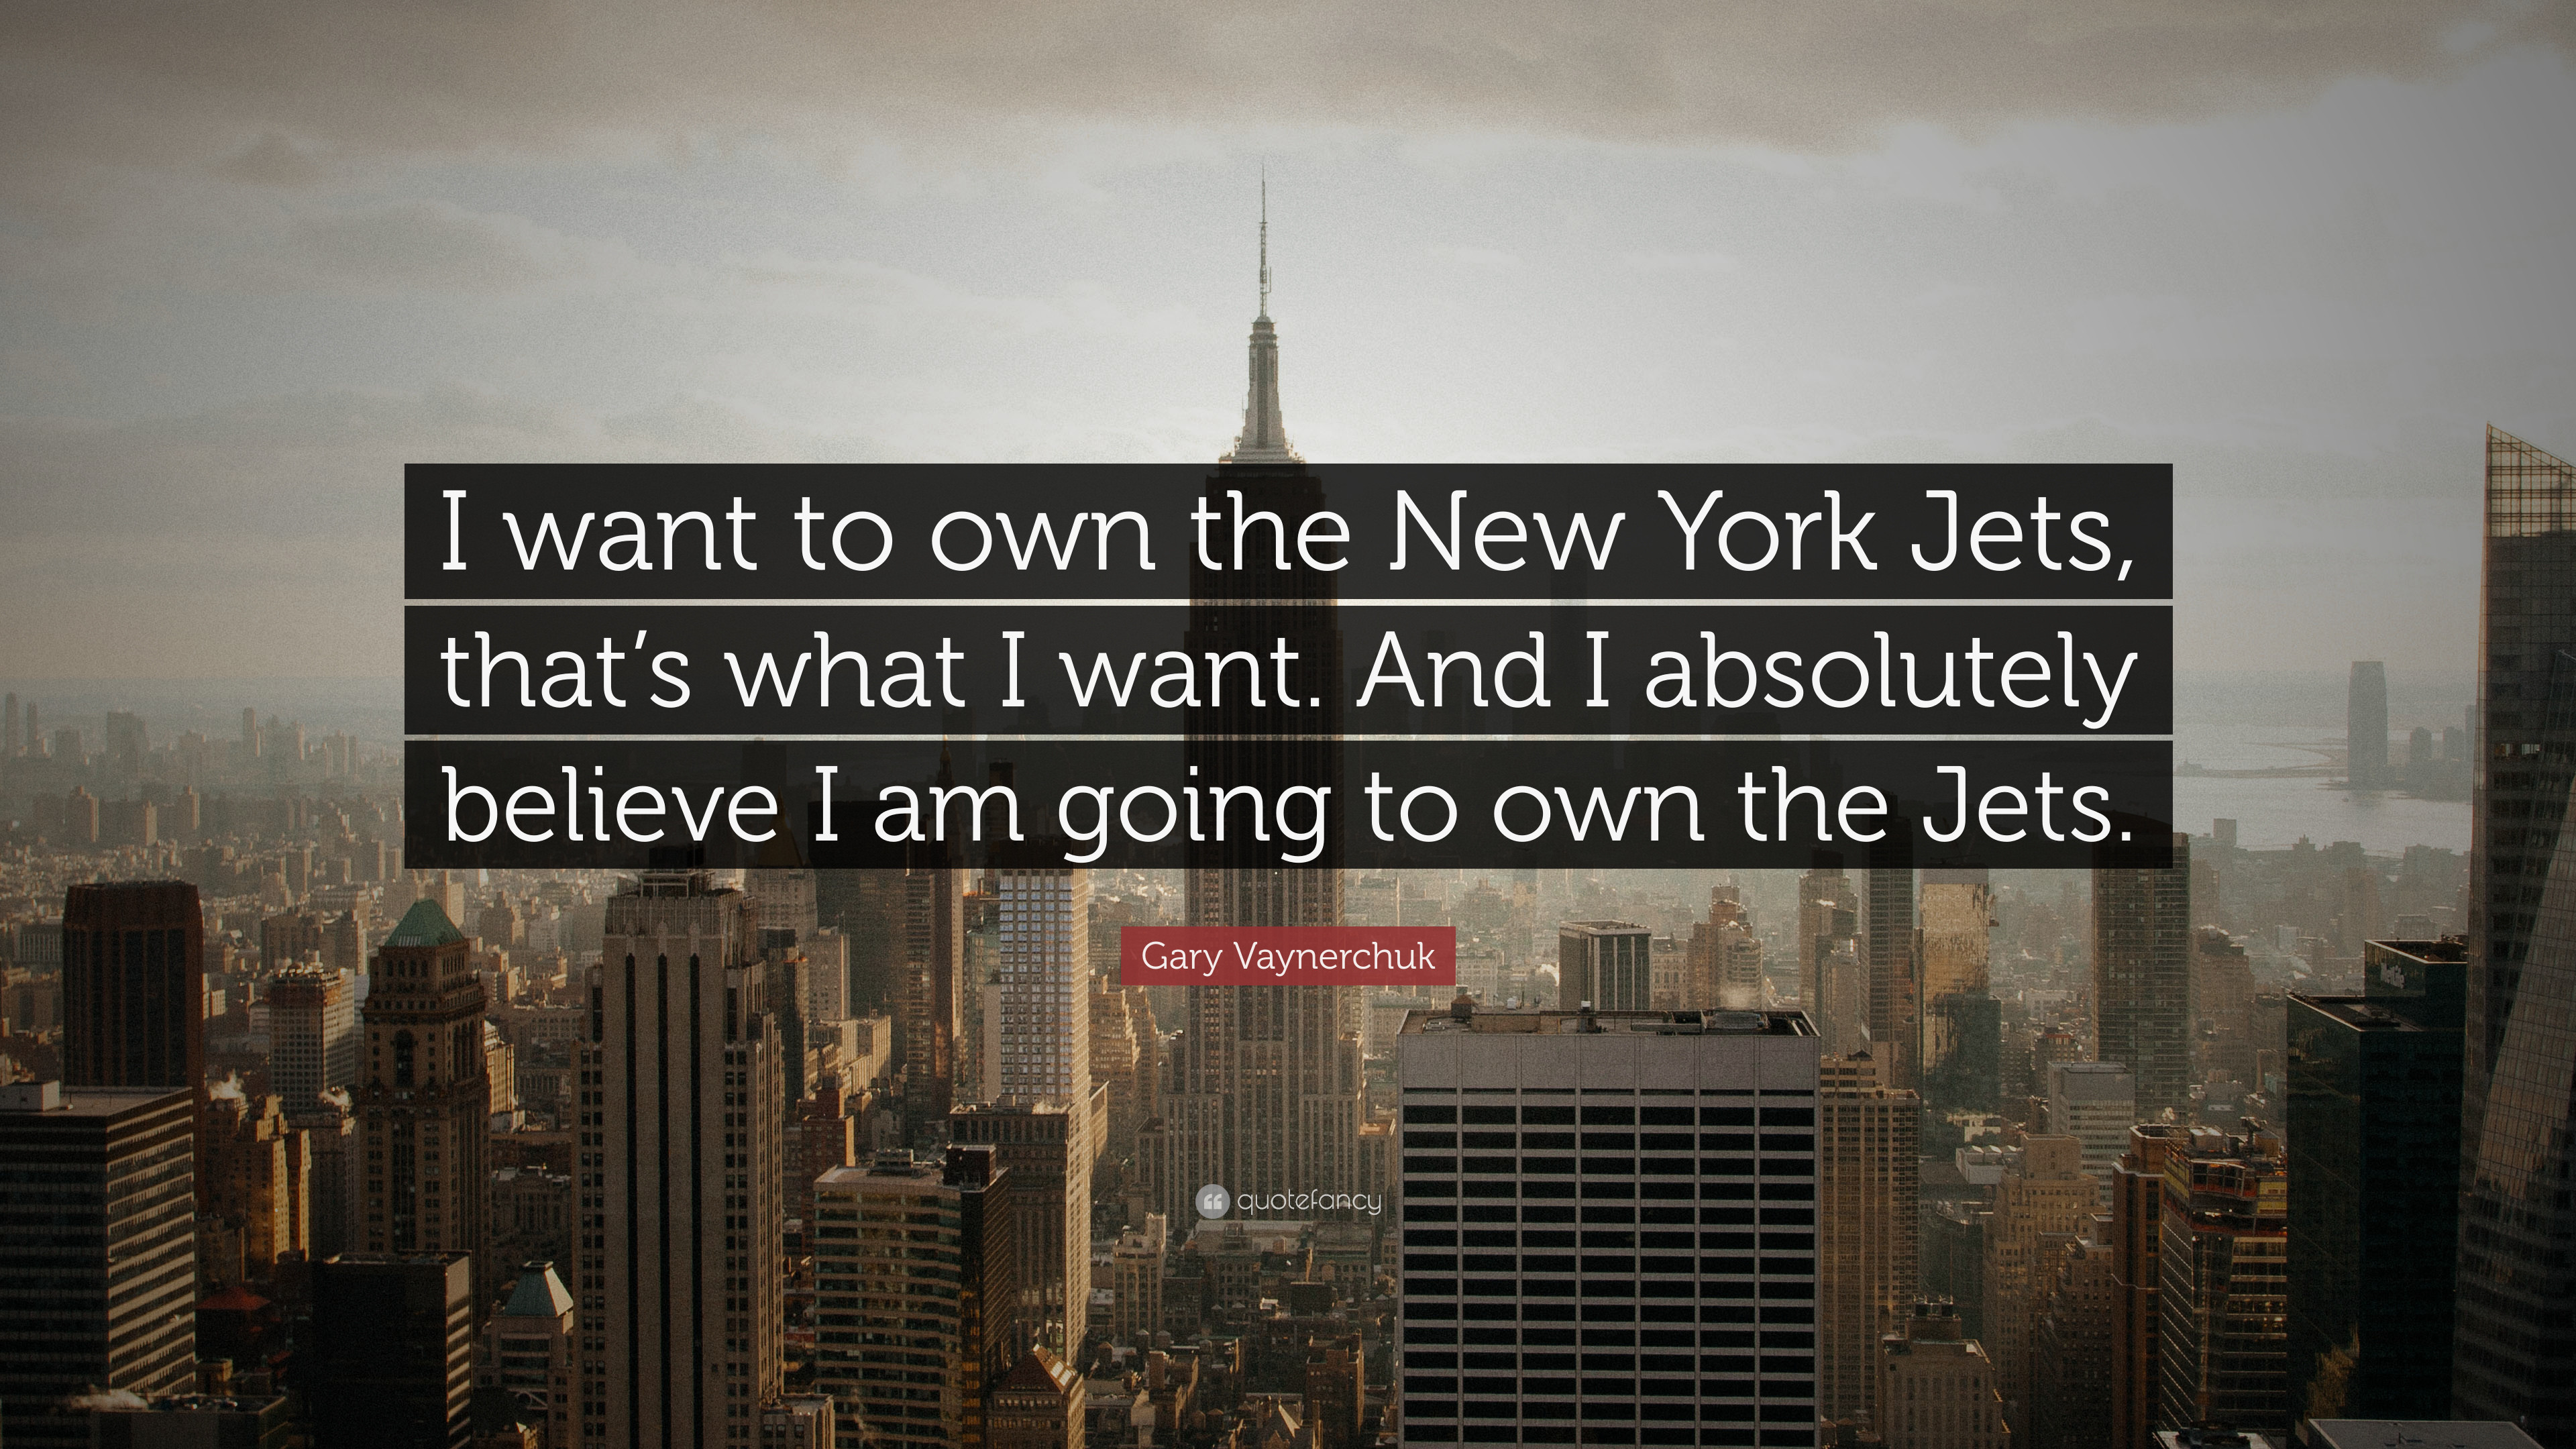 3840x2160 Gary Vaynerchuk Quote: “I want to own the New York Jets, that's what